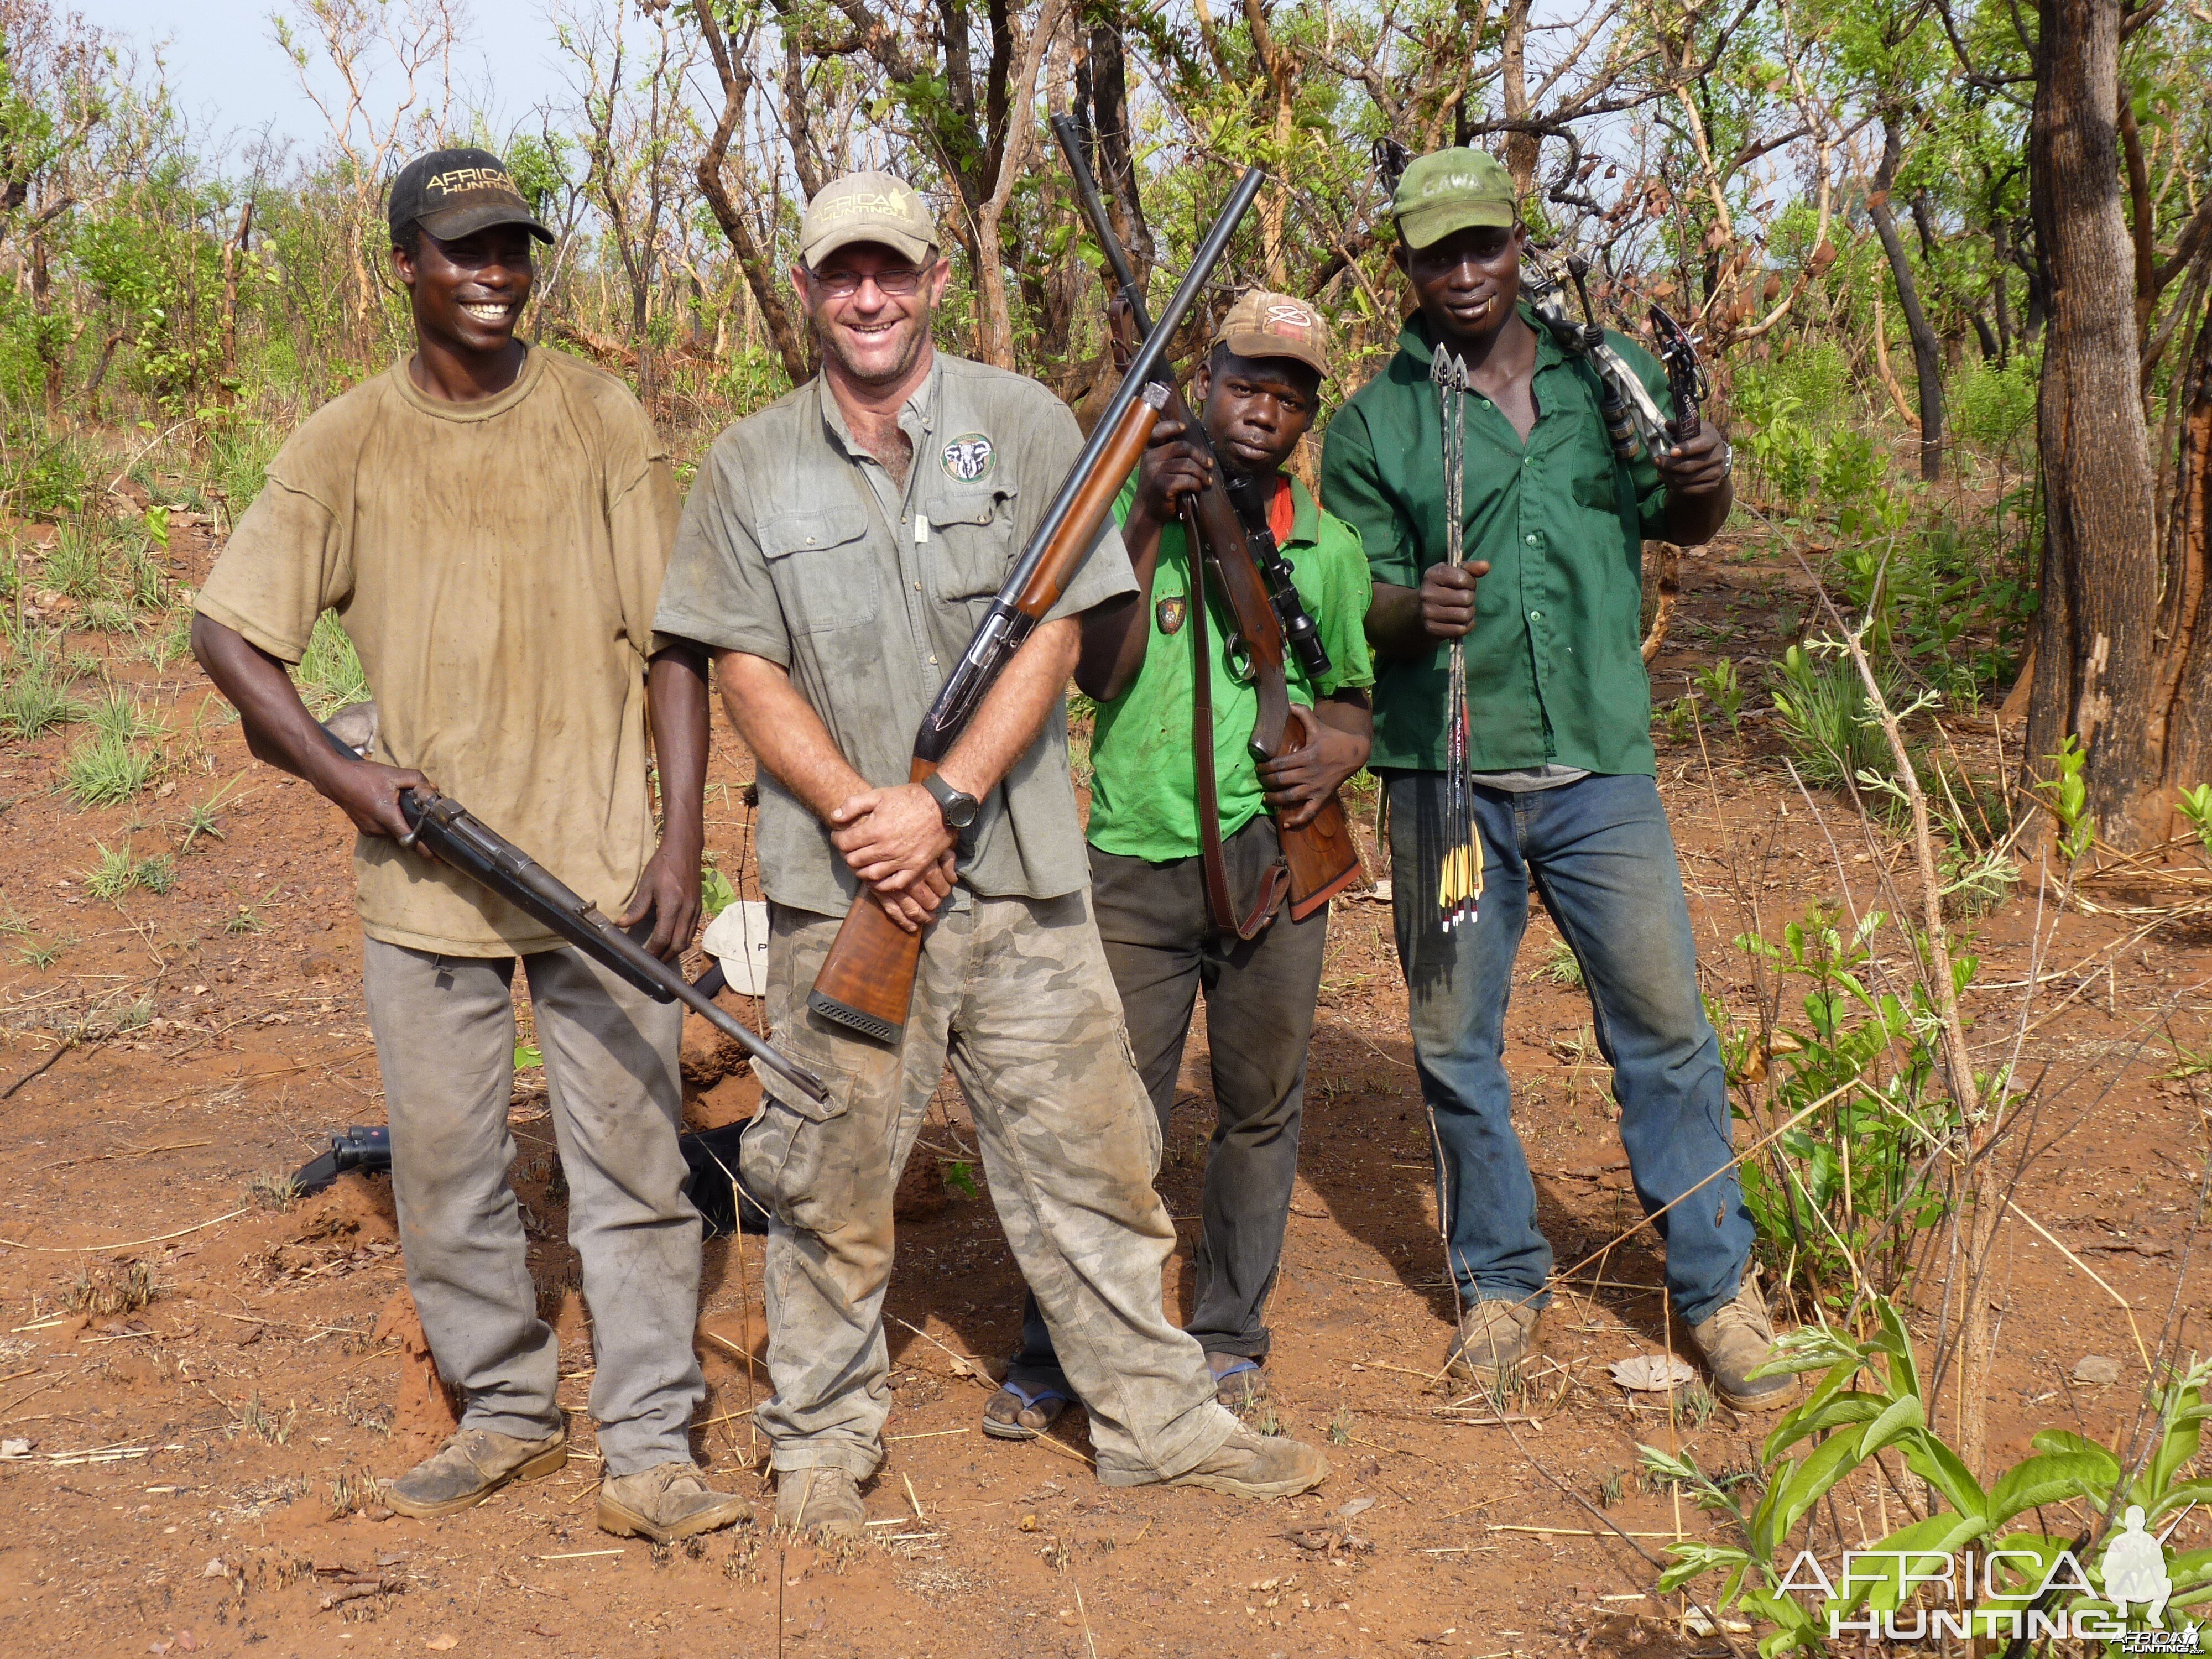 Hunting Team in Central African Republic